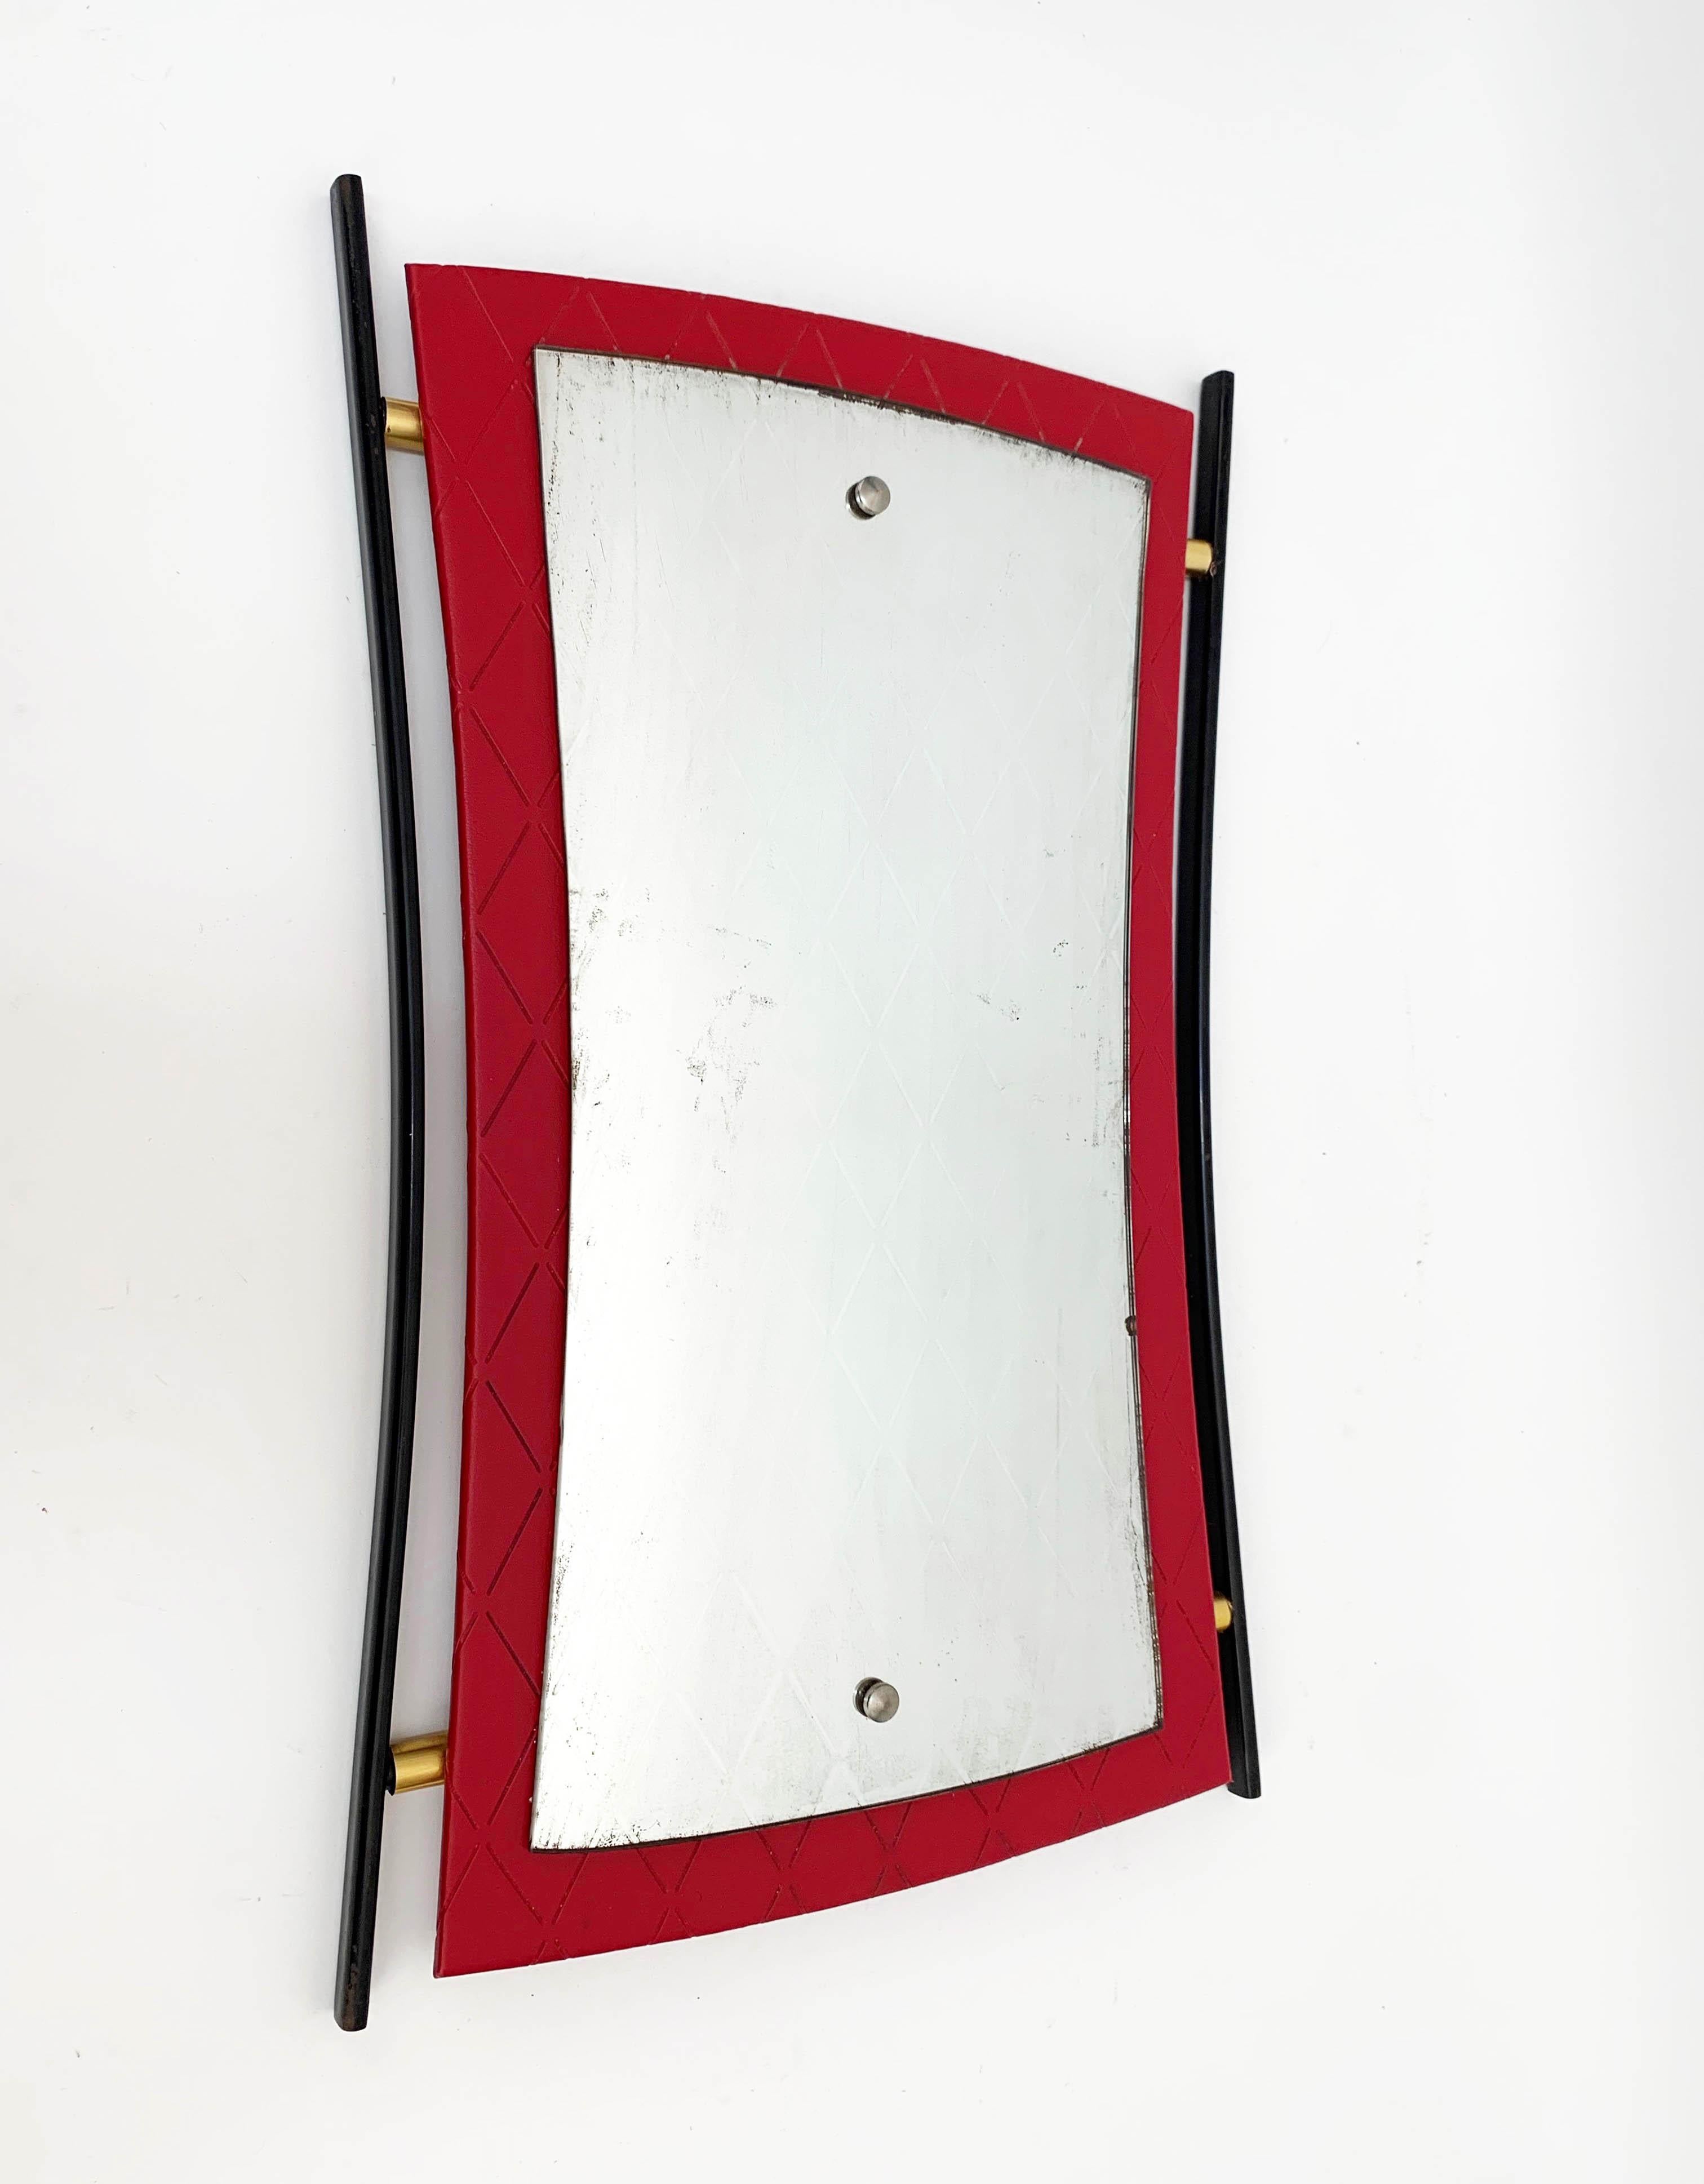 Amazing midcentury enameled iron, red sky plastic covered wood and brass finishes. This amazing piece design is attributed to Cesare Lacca and was produced in Italy during 1950s.

This item is spectacular due to its lines, as it has concave lines